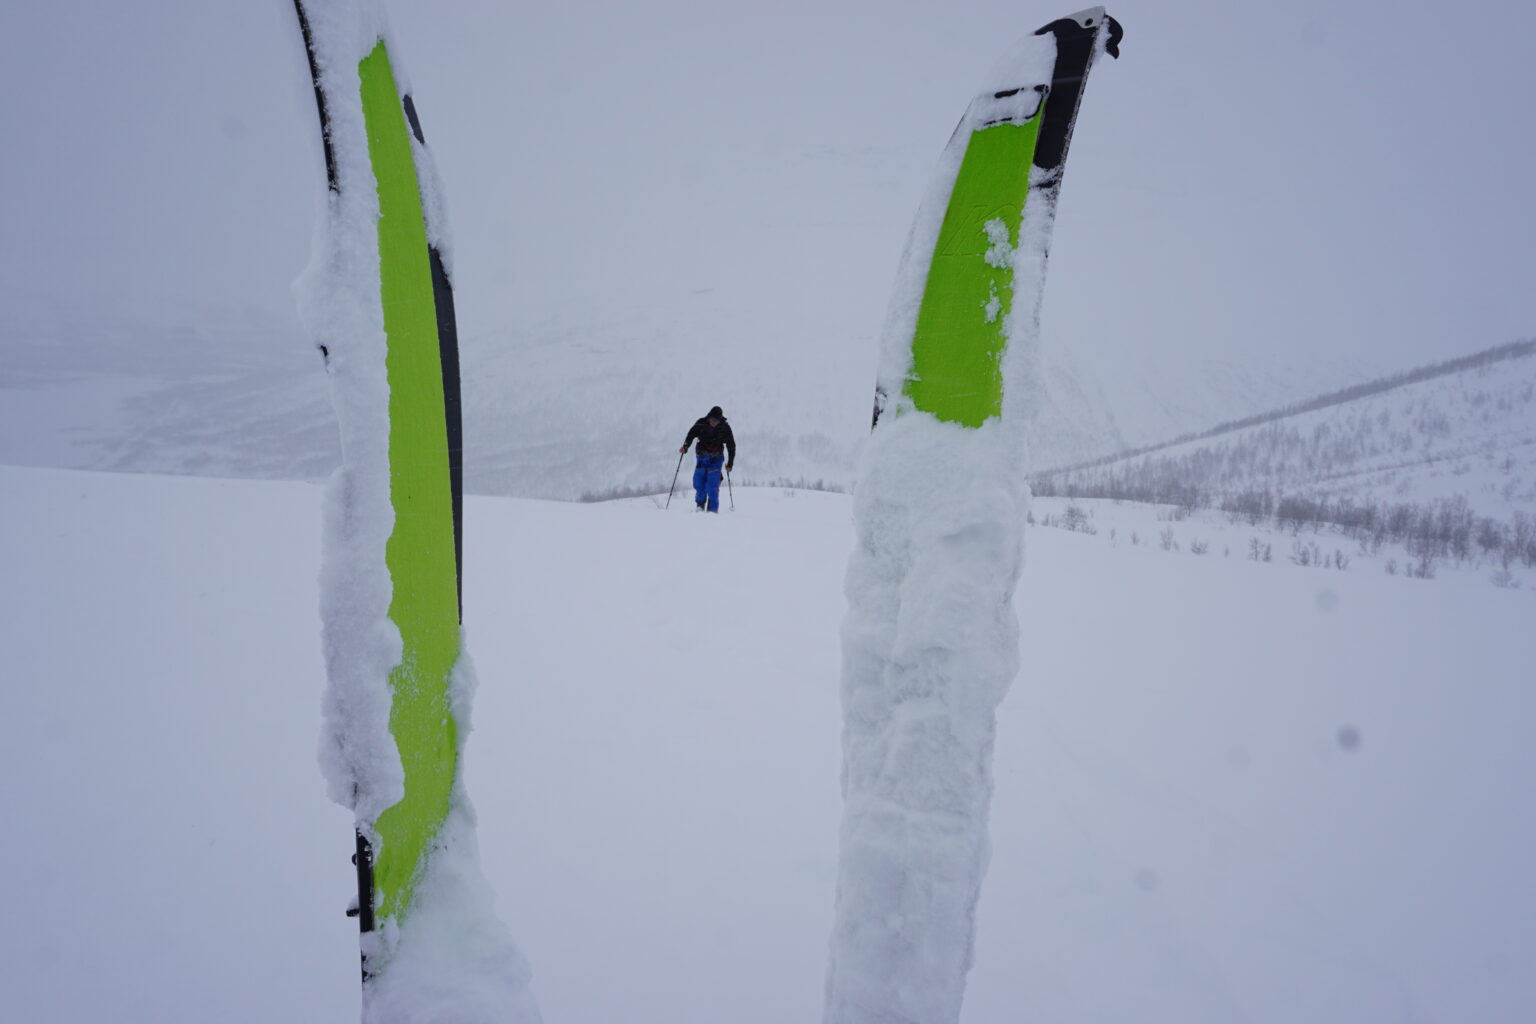 Snow sticking to the skins while ski touring in Northern Norway